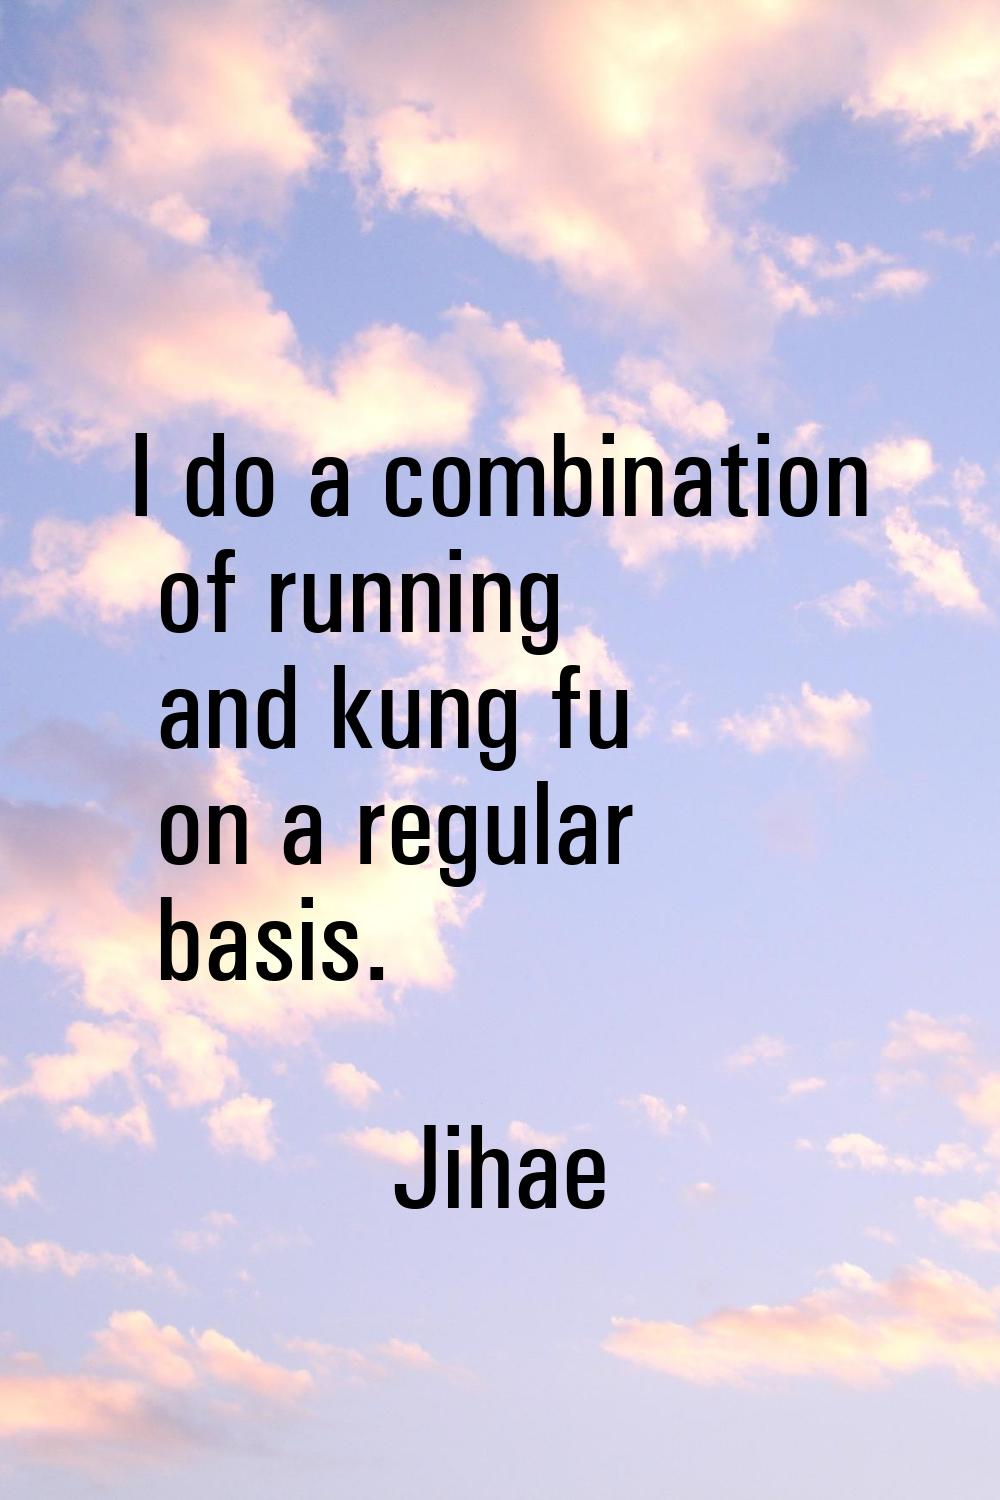 I do a combination of running and kung fu on a regular basis.